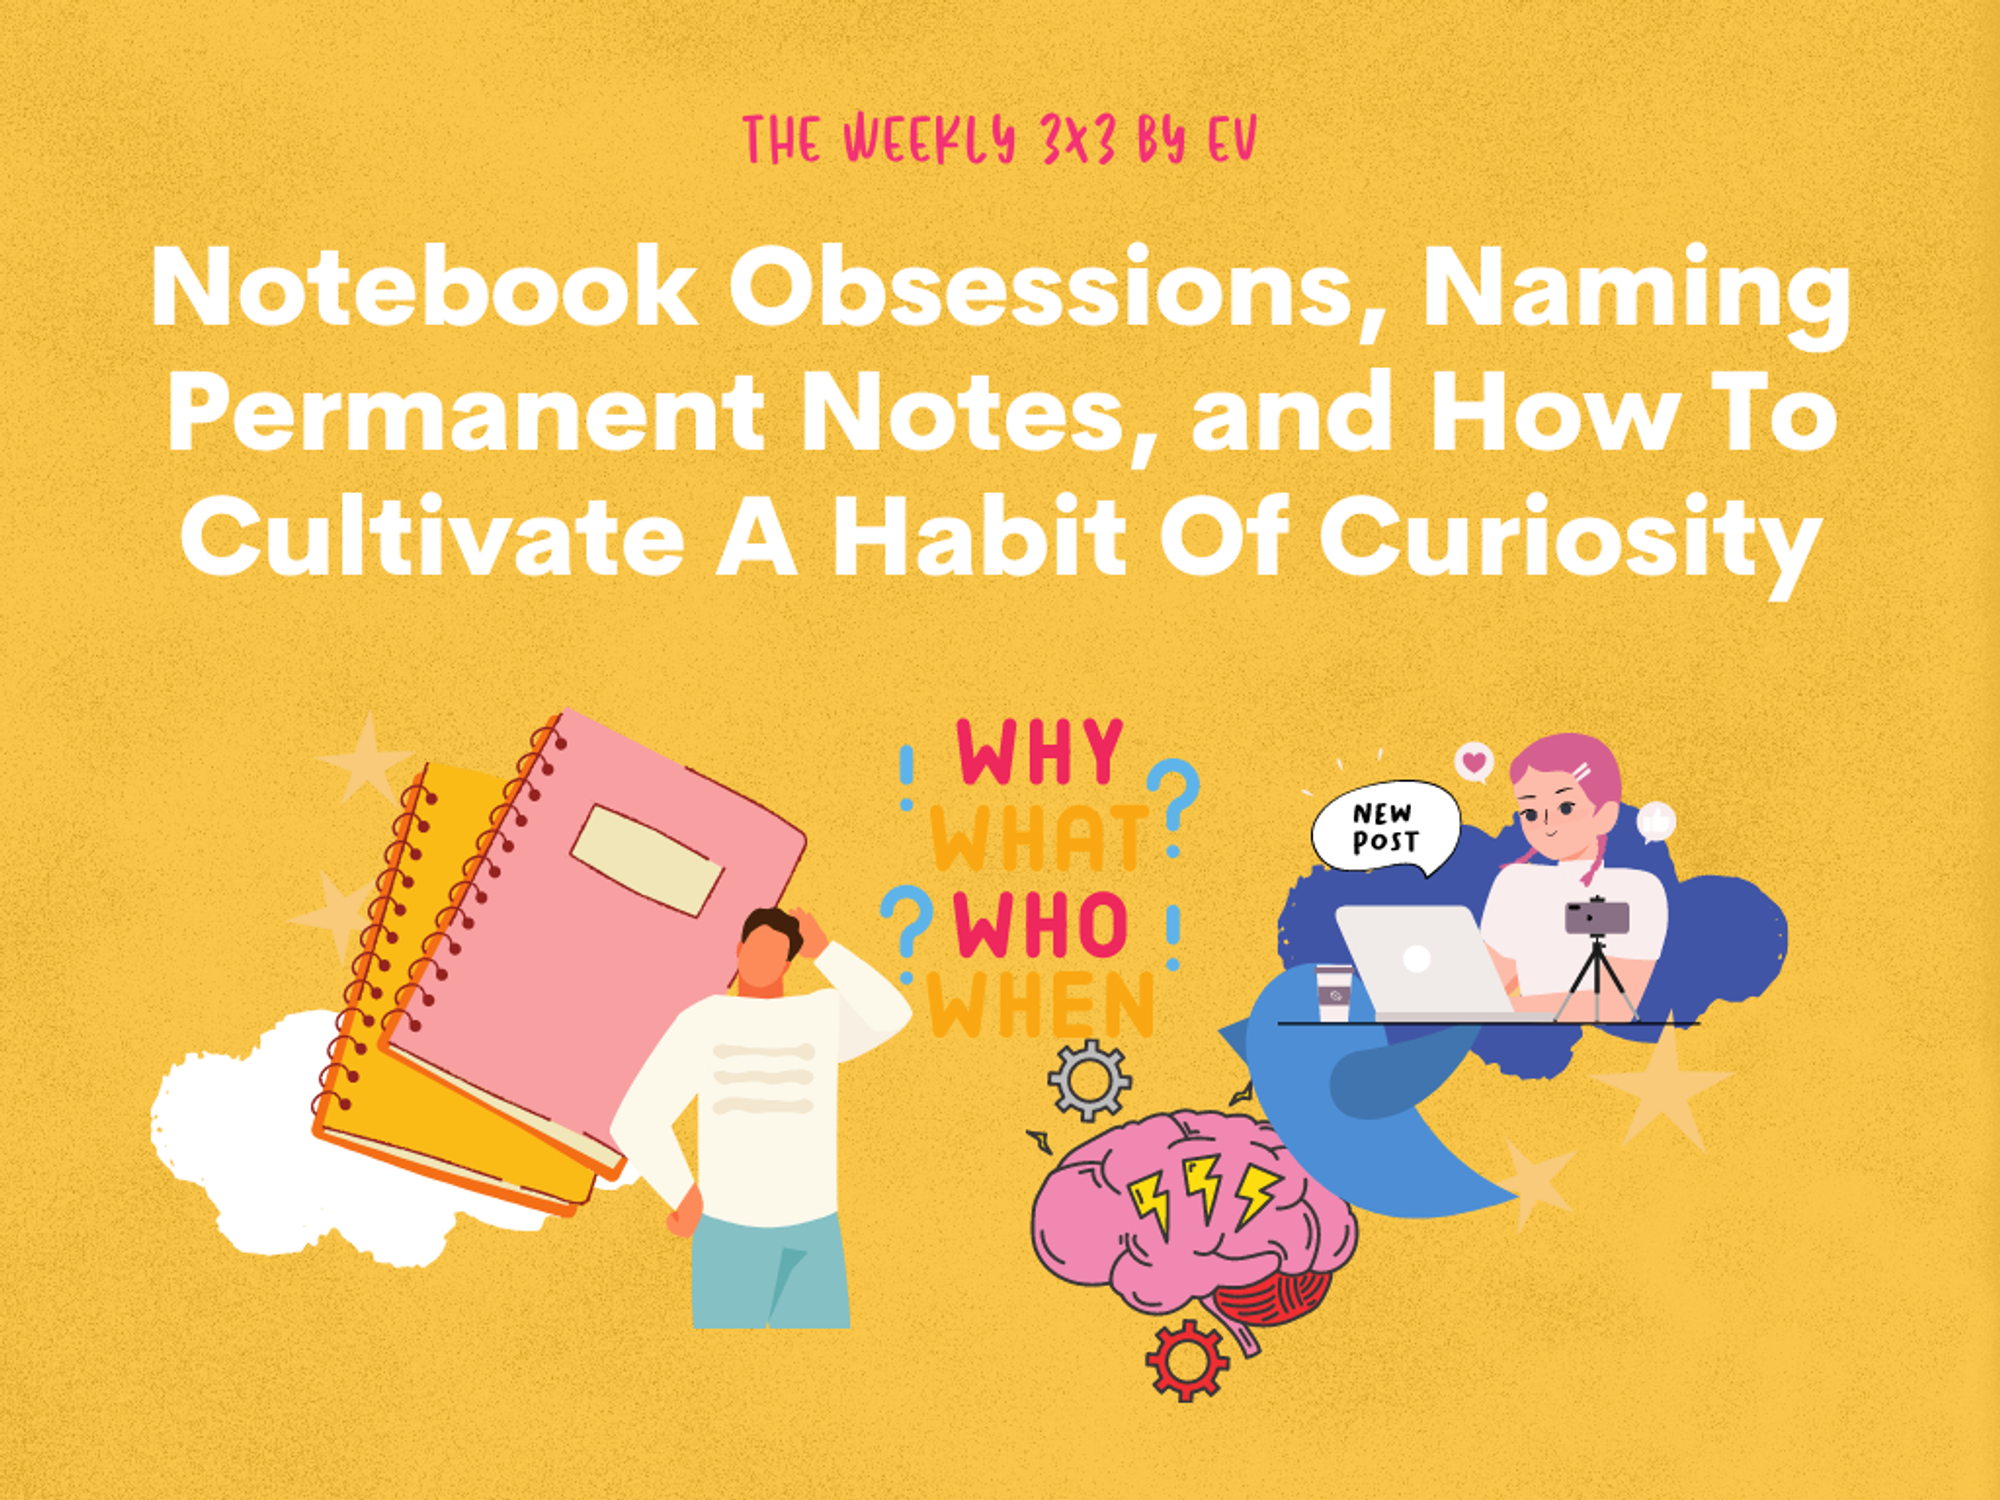 Weekly 3x3: Notebook Obsessions, Naming Permanent Notes, and How To Cultivate A Habit Of Curiosity